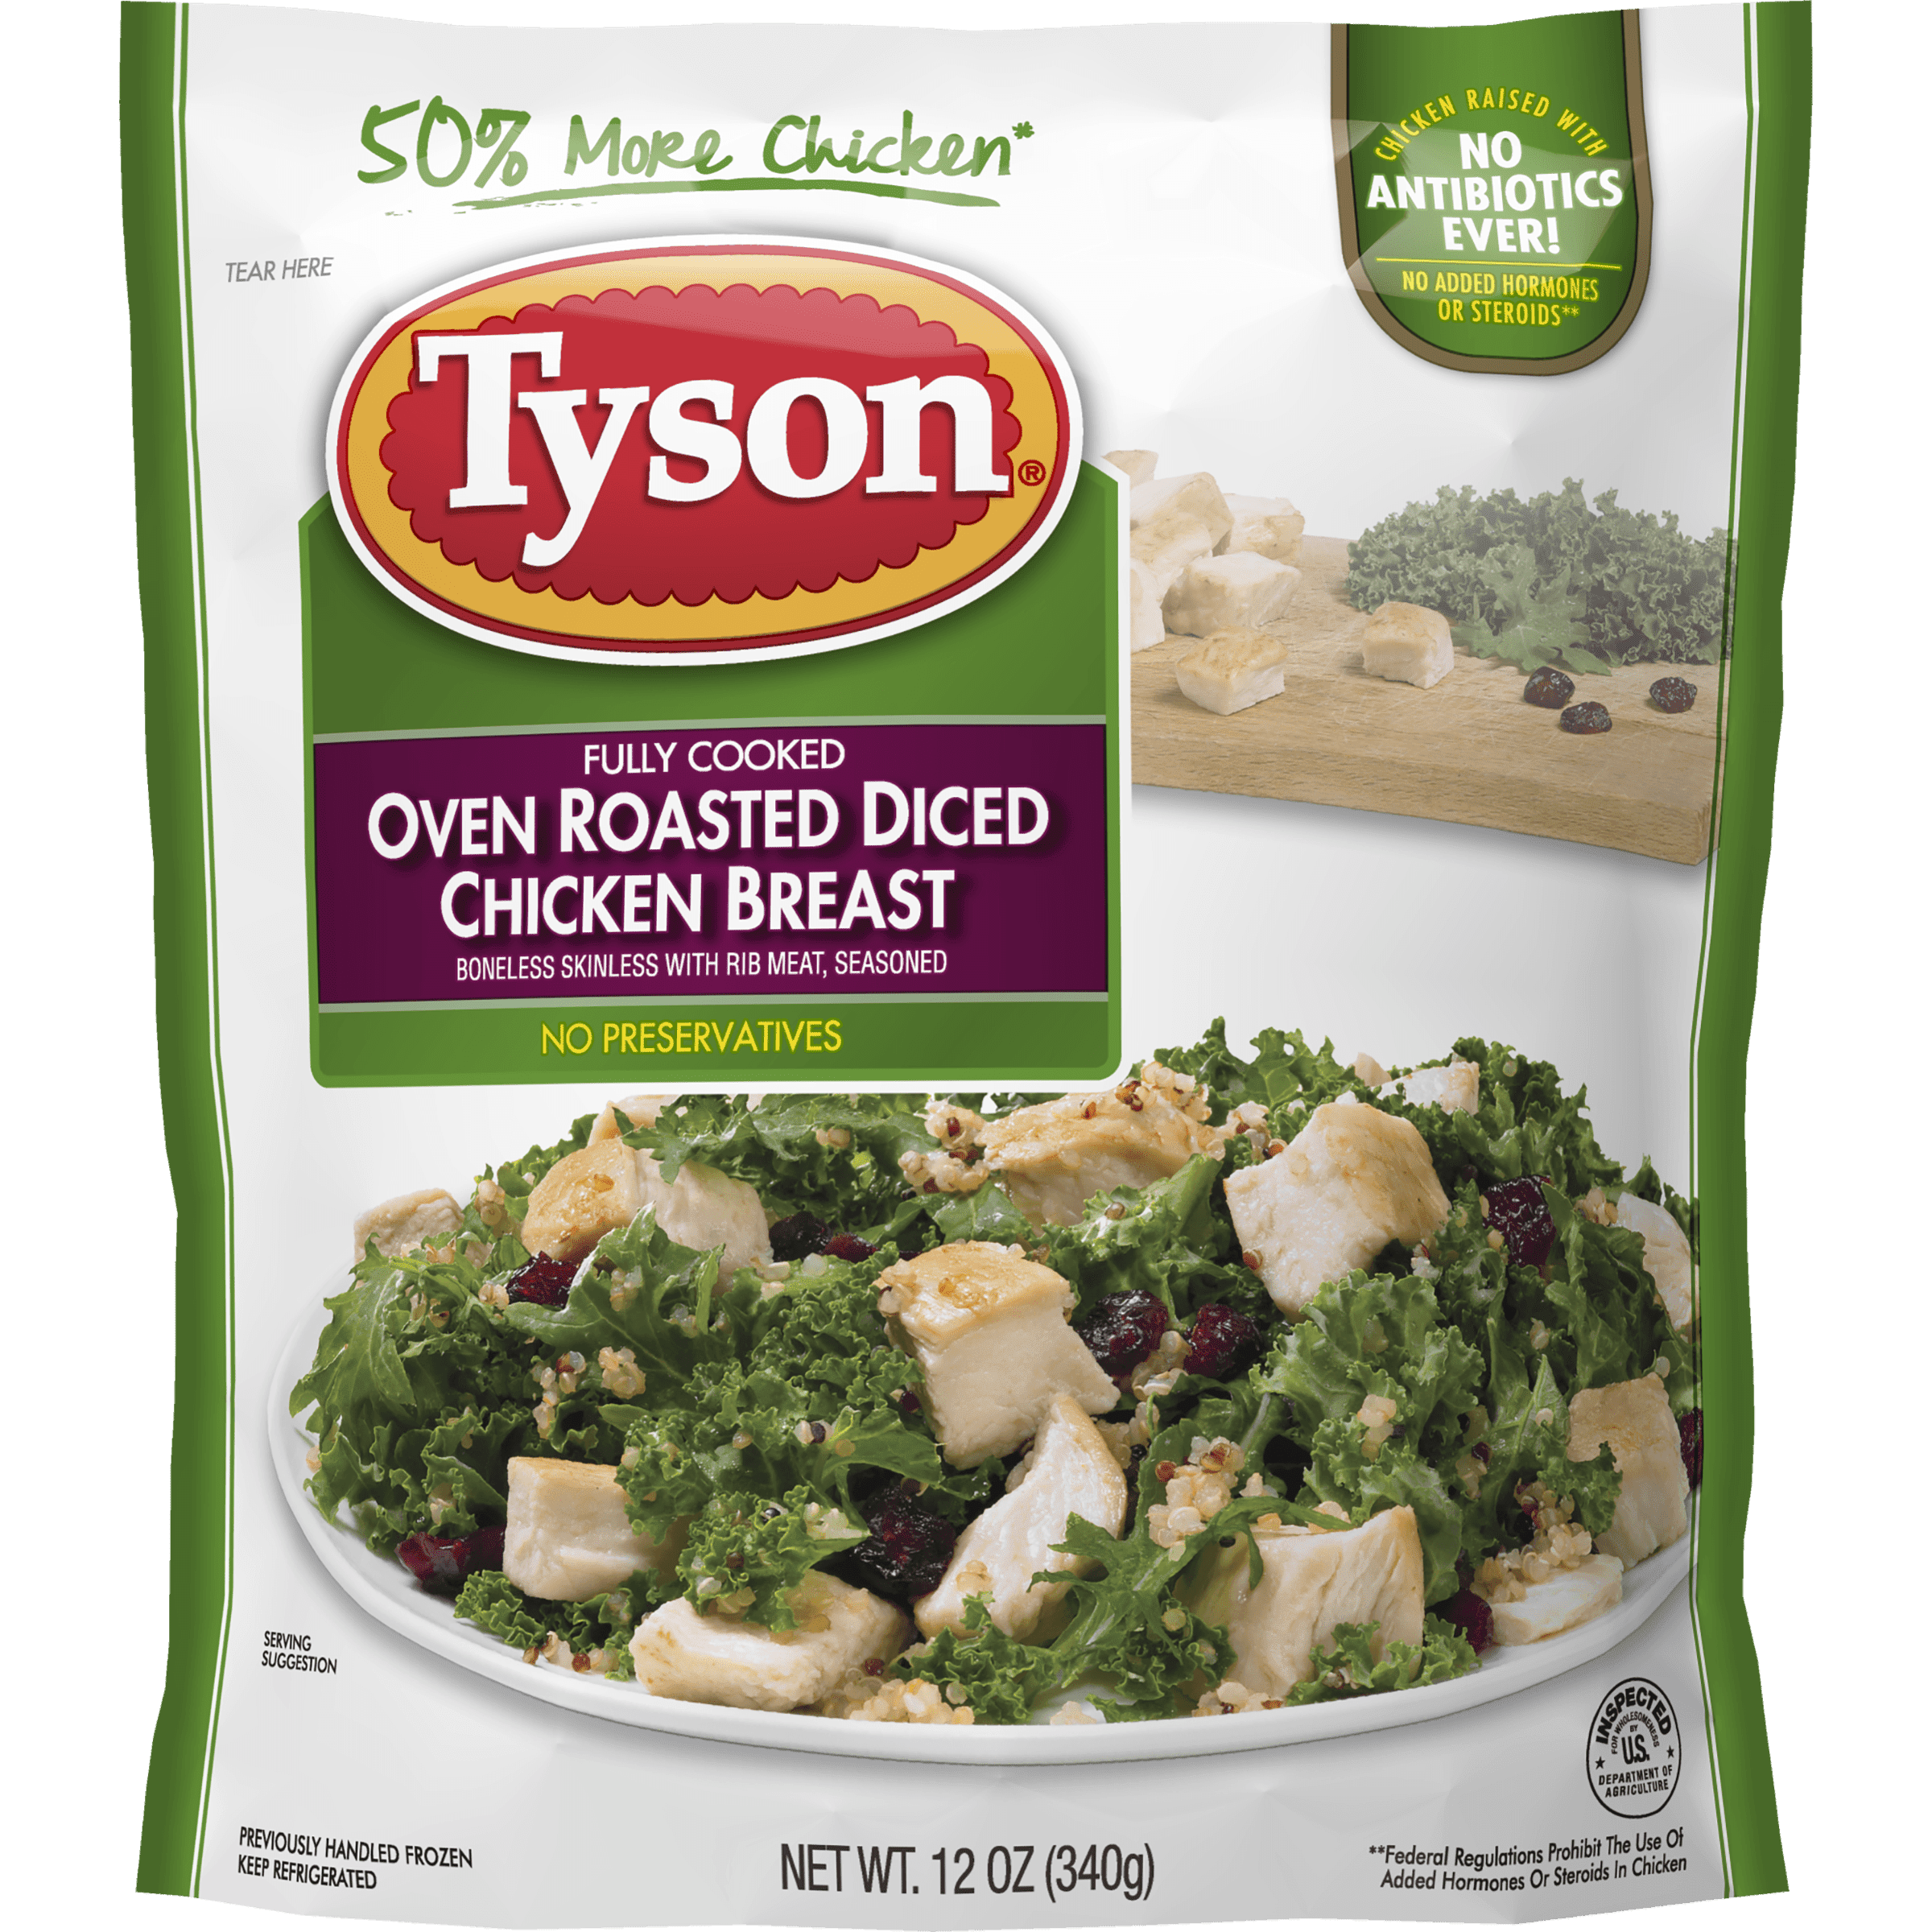 Grilled amp Ready Tyson Oven Roasted Diced Chicken Breast Walmart com 